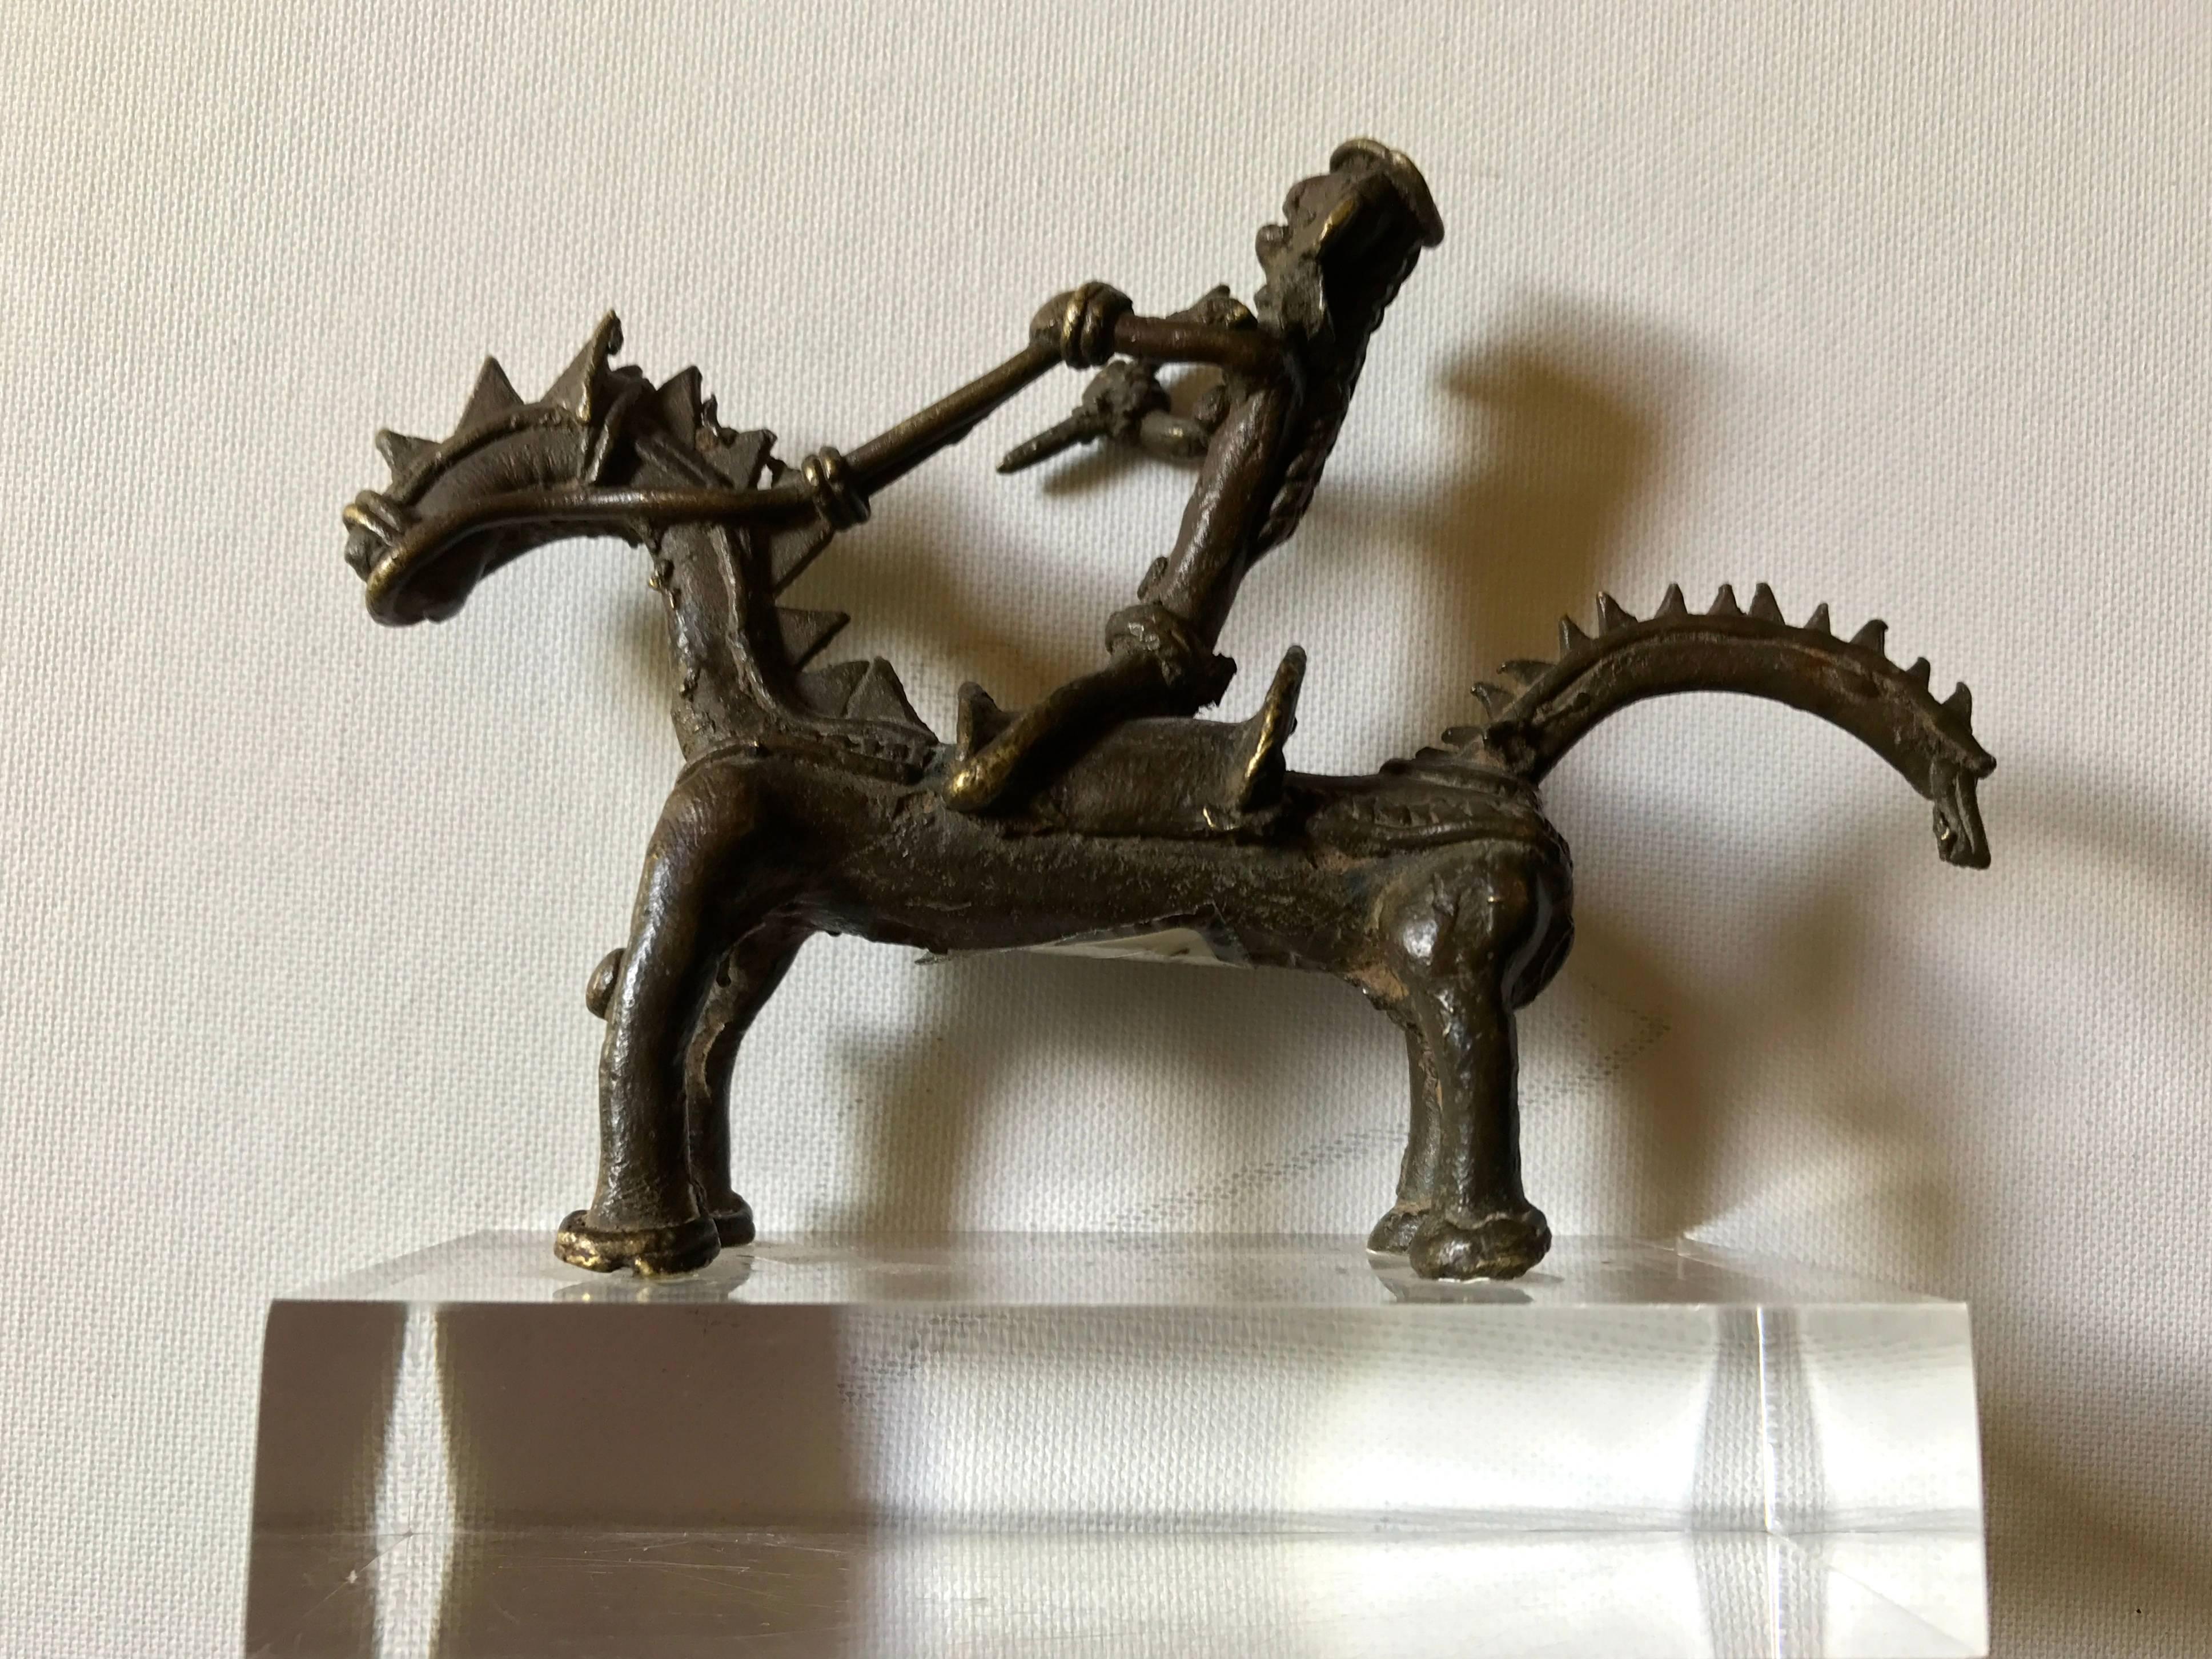 A small Bastar tribal bronze of a rider with a spear on a saddled horse. On a plexiglass base, Orissa, India, late 19th century.